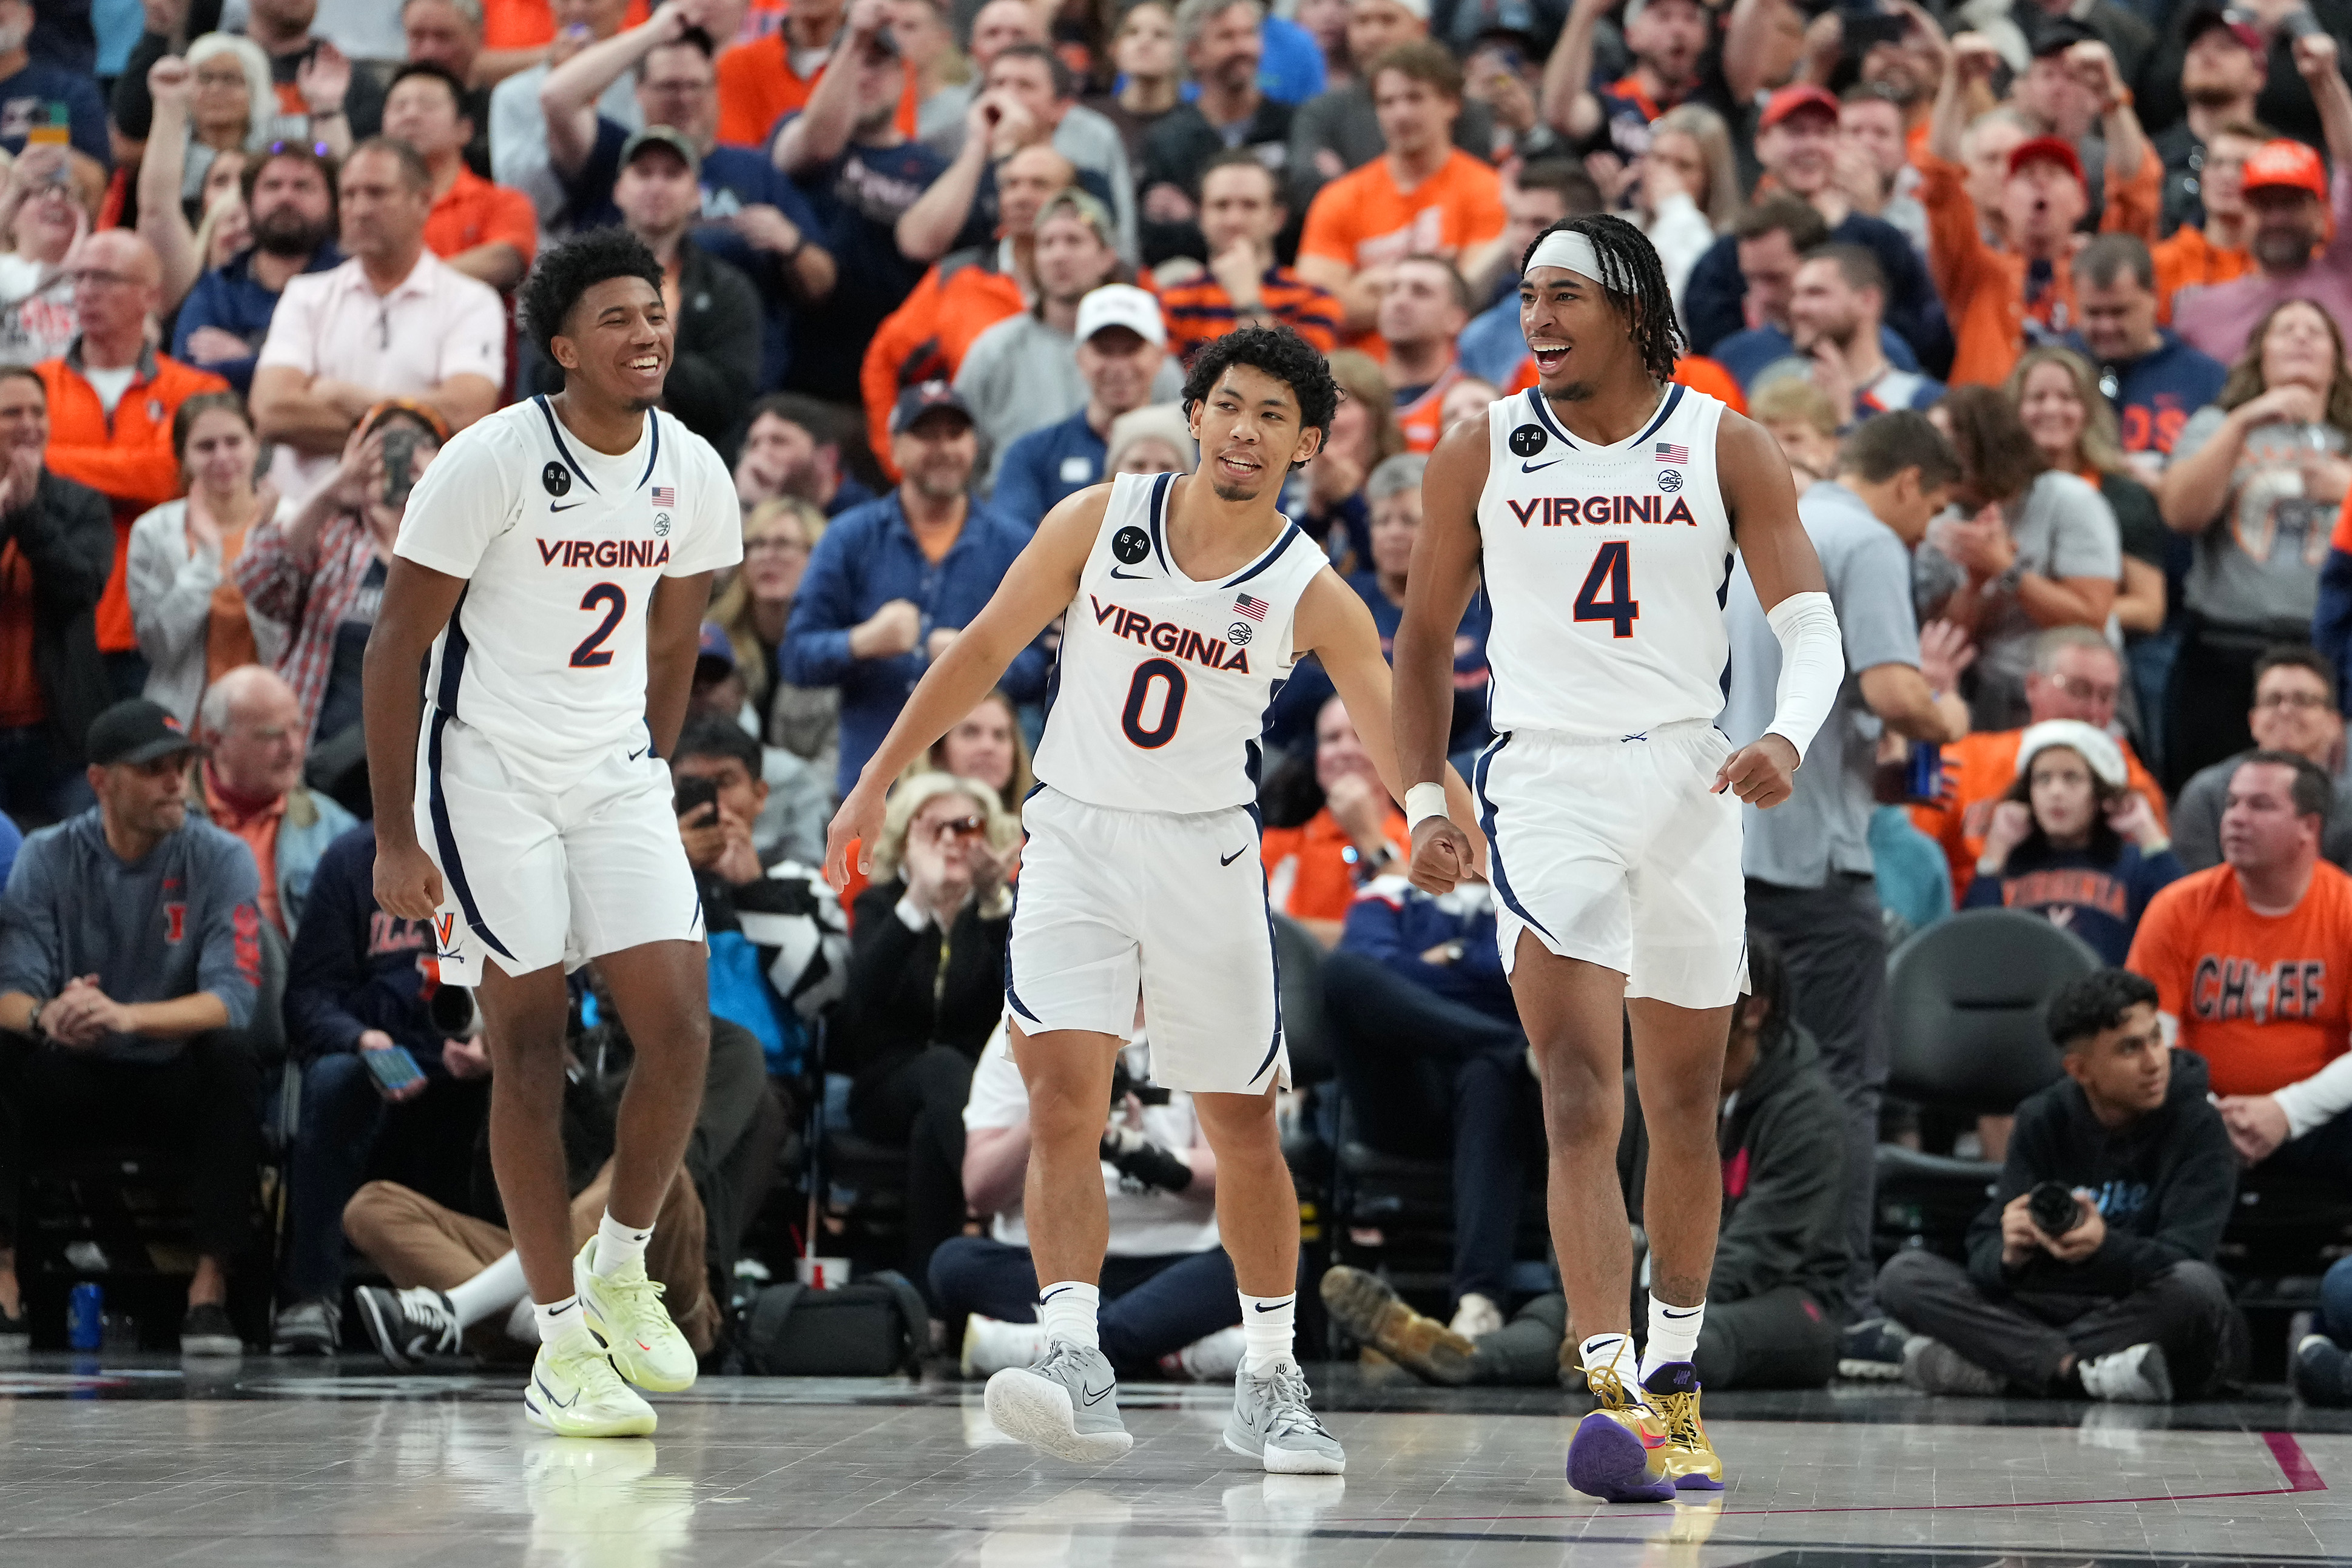 How to Watch Virginia at Miami in College Basketball: Live Stream, TV Channel